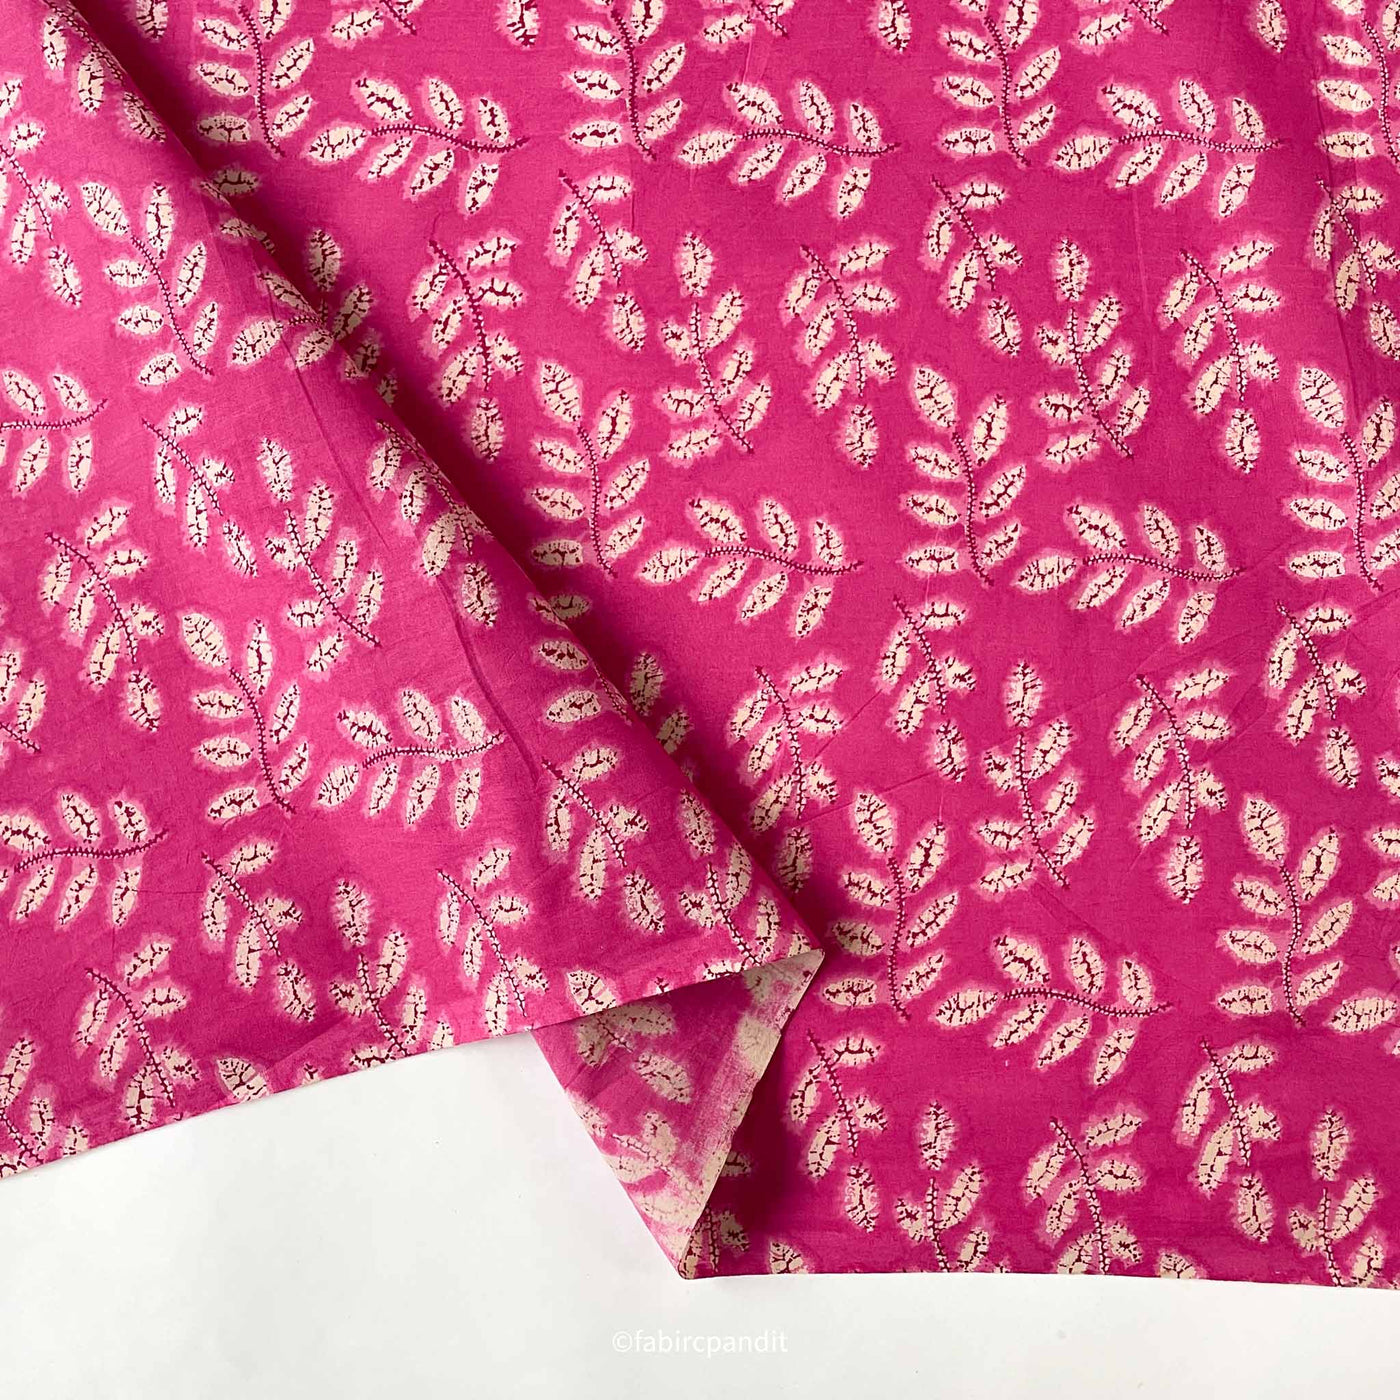 Fabric Pandit Cut Piece (Cut Piece) Deep Pink and Cream Leaves and Petals All Over Hand Block Printed Pure Cotton Fabric (Width 43 inches)